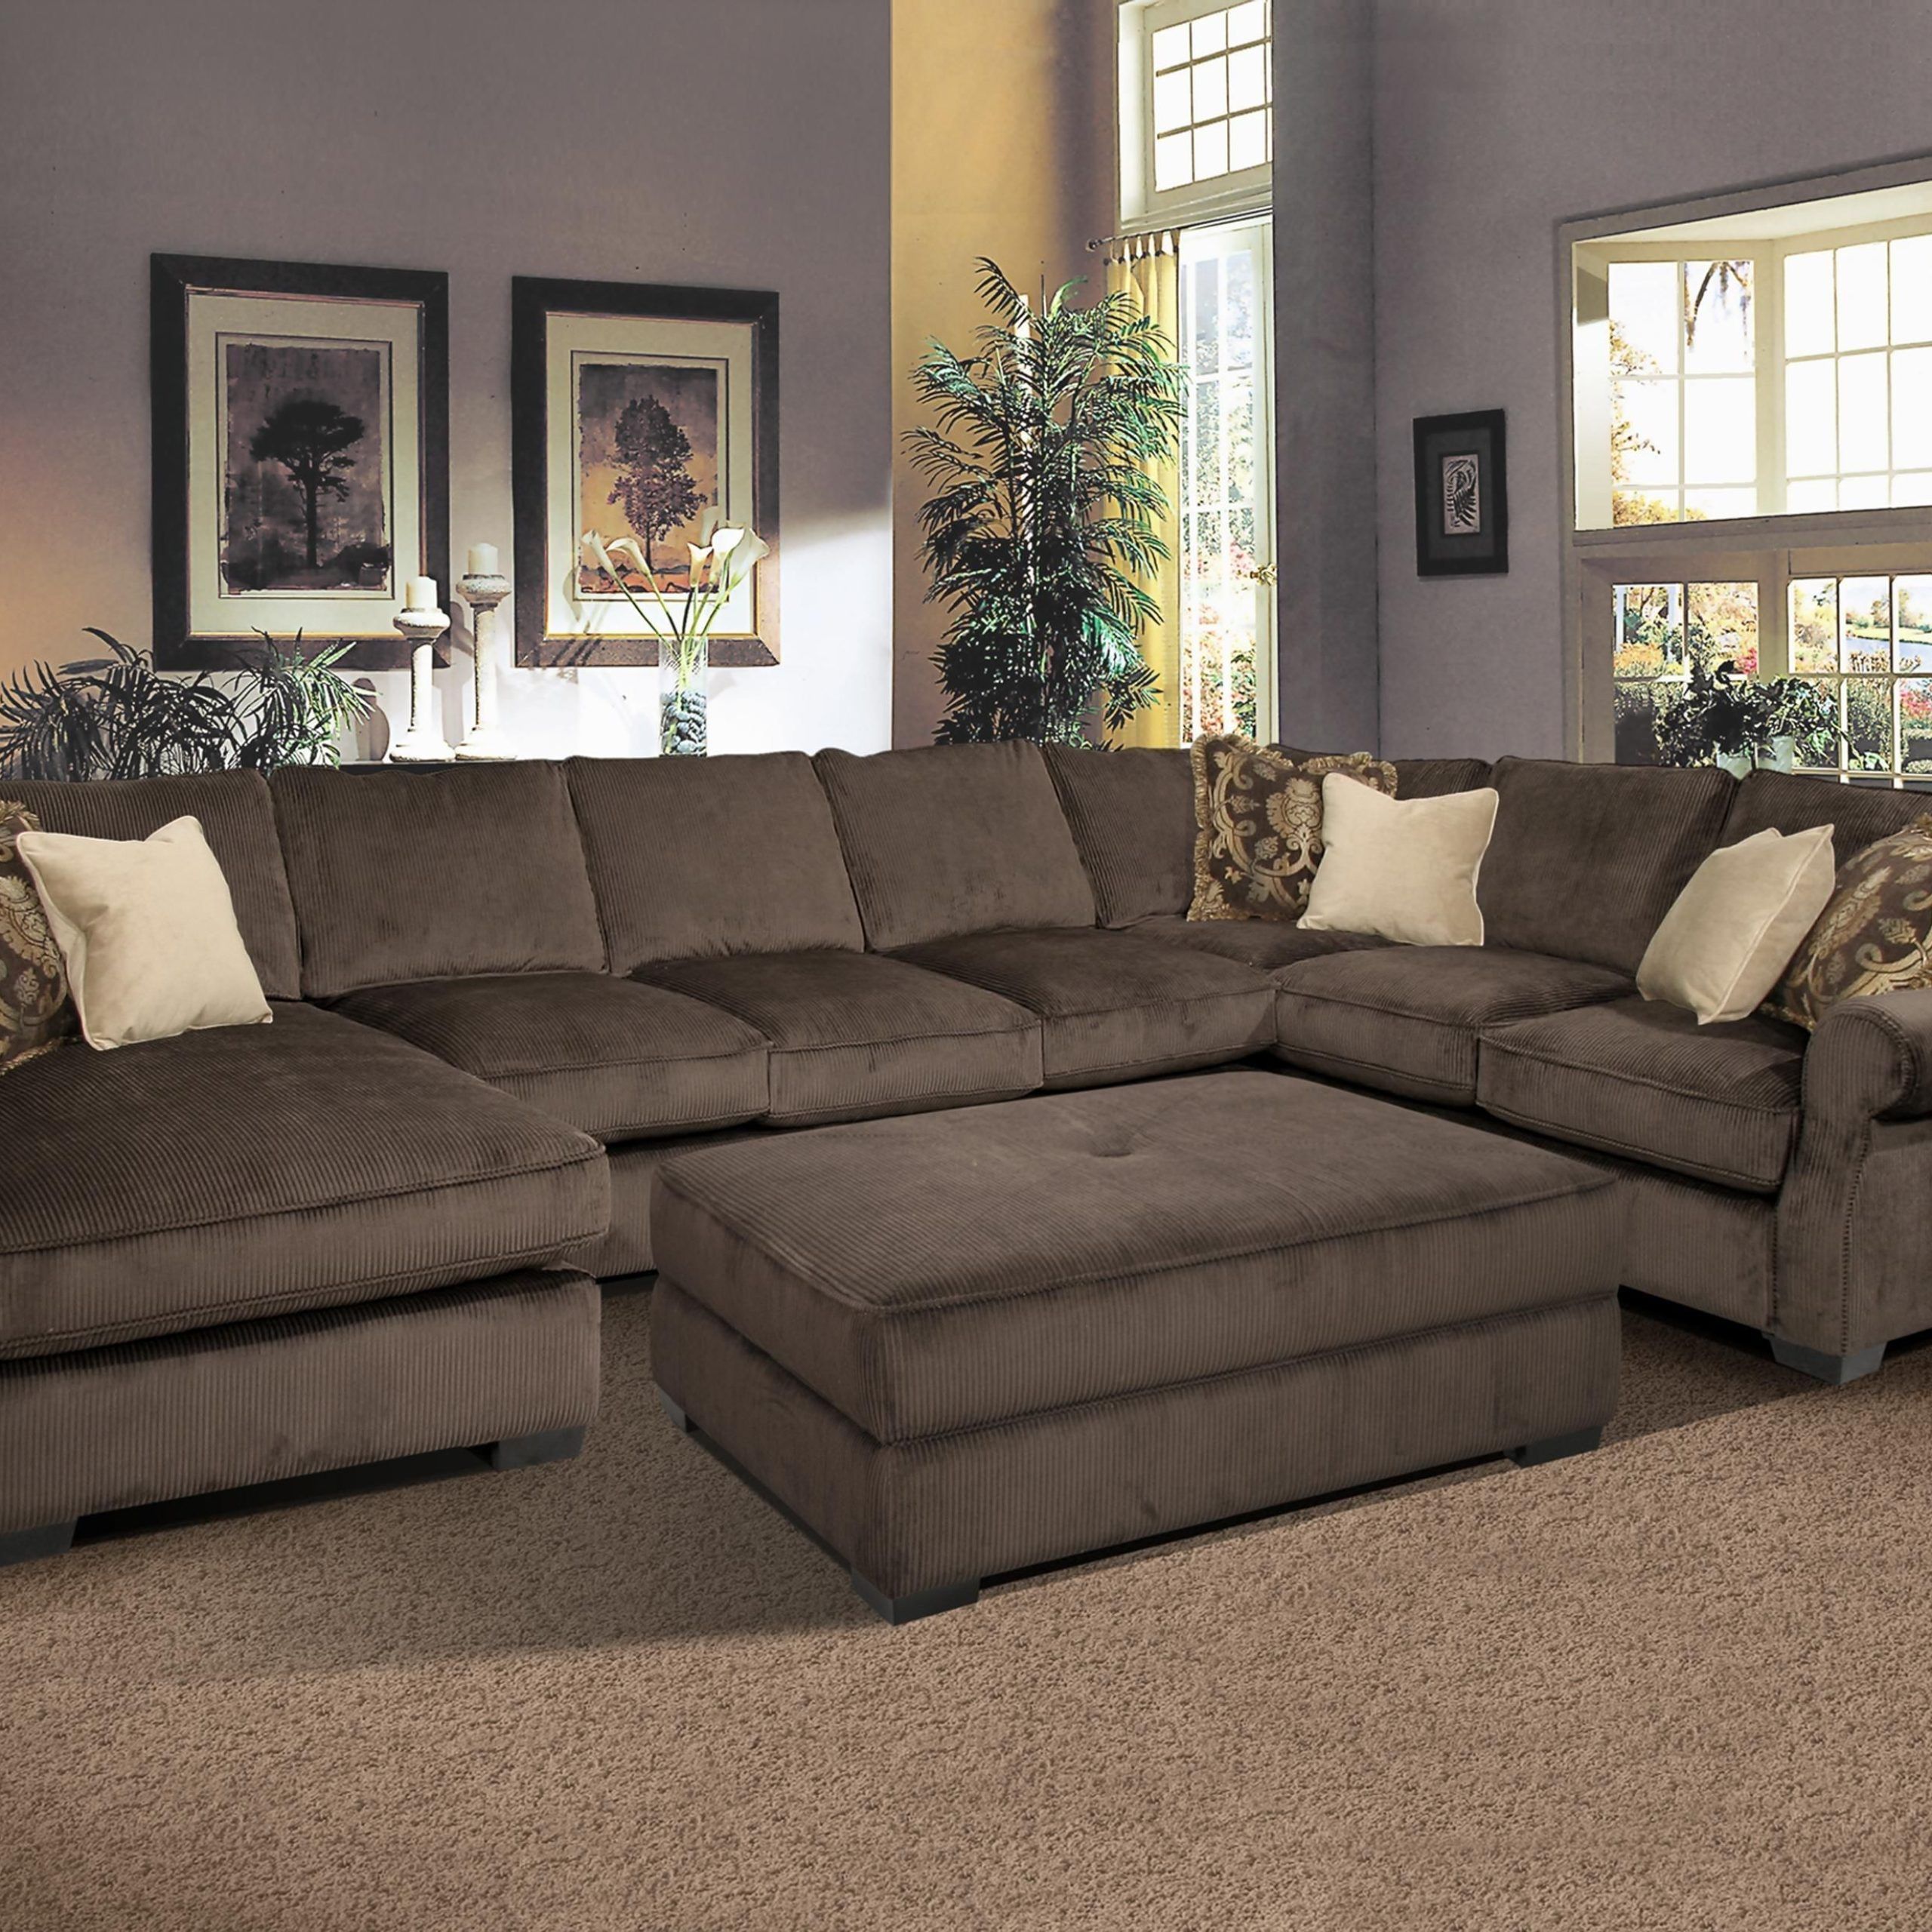 10 Collection Of Sectionals With Oversized Ottoman | Sofa Ideas Regarding Sofas With Ottomans (Gallery 1 of 20)